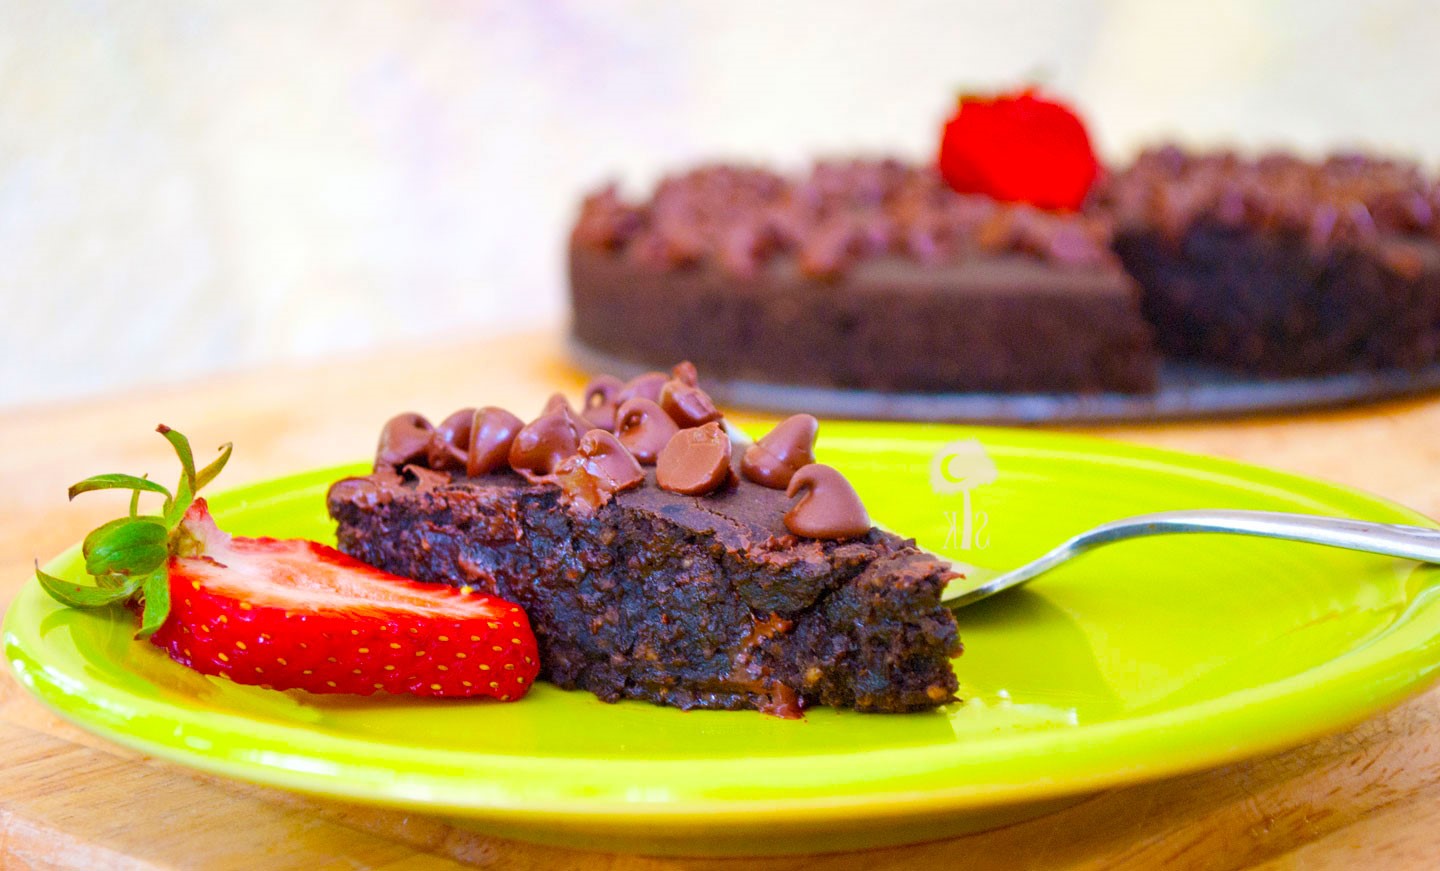 Decadent Chocolate Chip Brownie Cake Recipe for Your Pressure Cooker